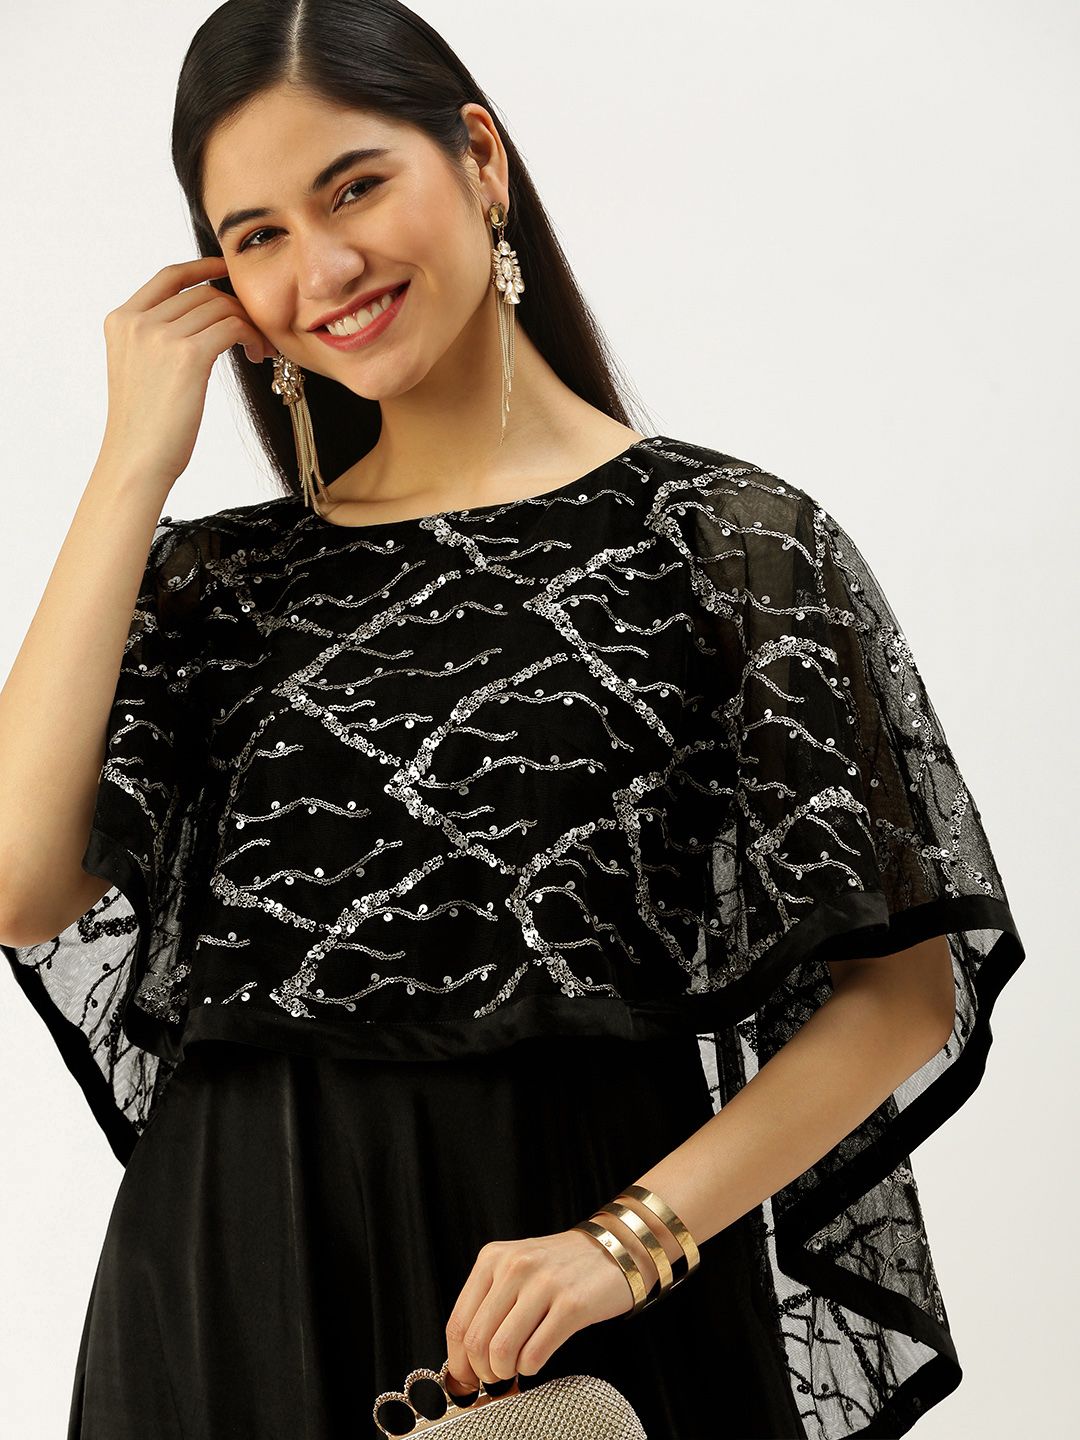 EthnoVogue Black Embellished Satin Ethnic Made To Measure Ethnic Dress with Cape Price in India